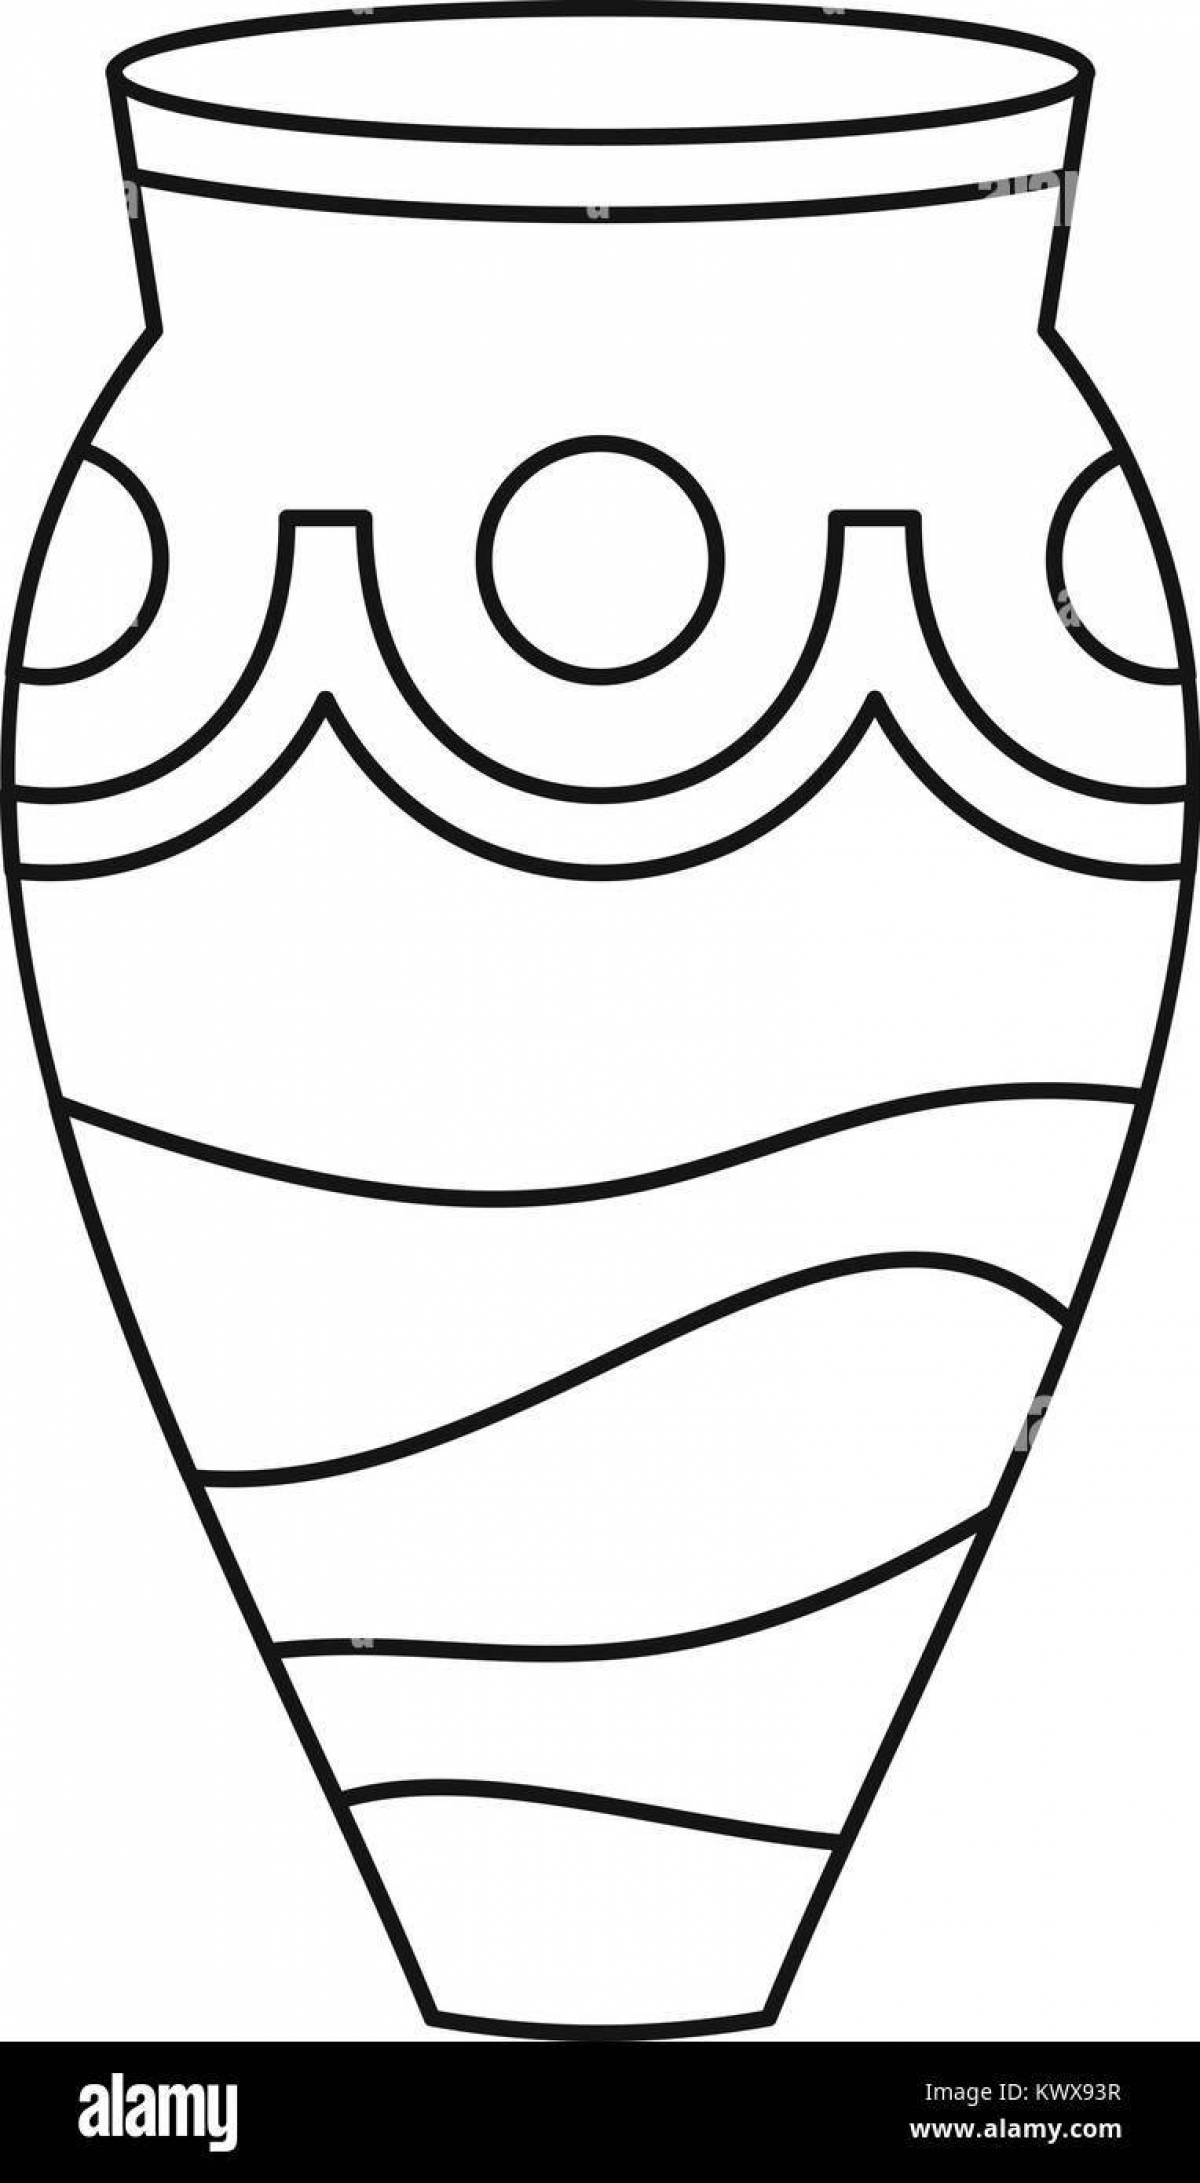 Intricate vase coloring page